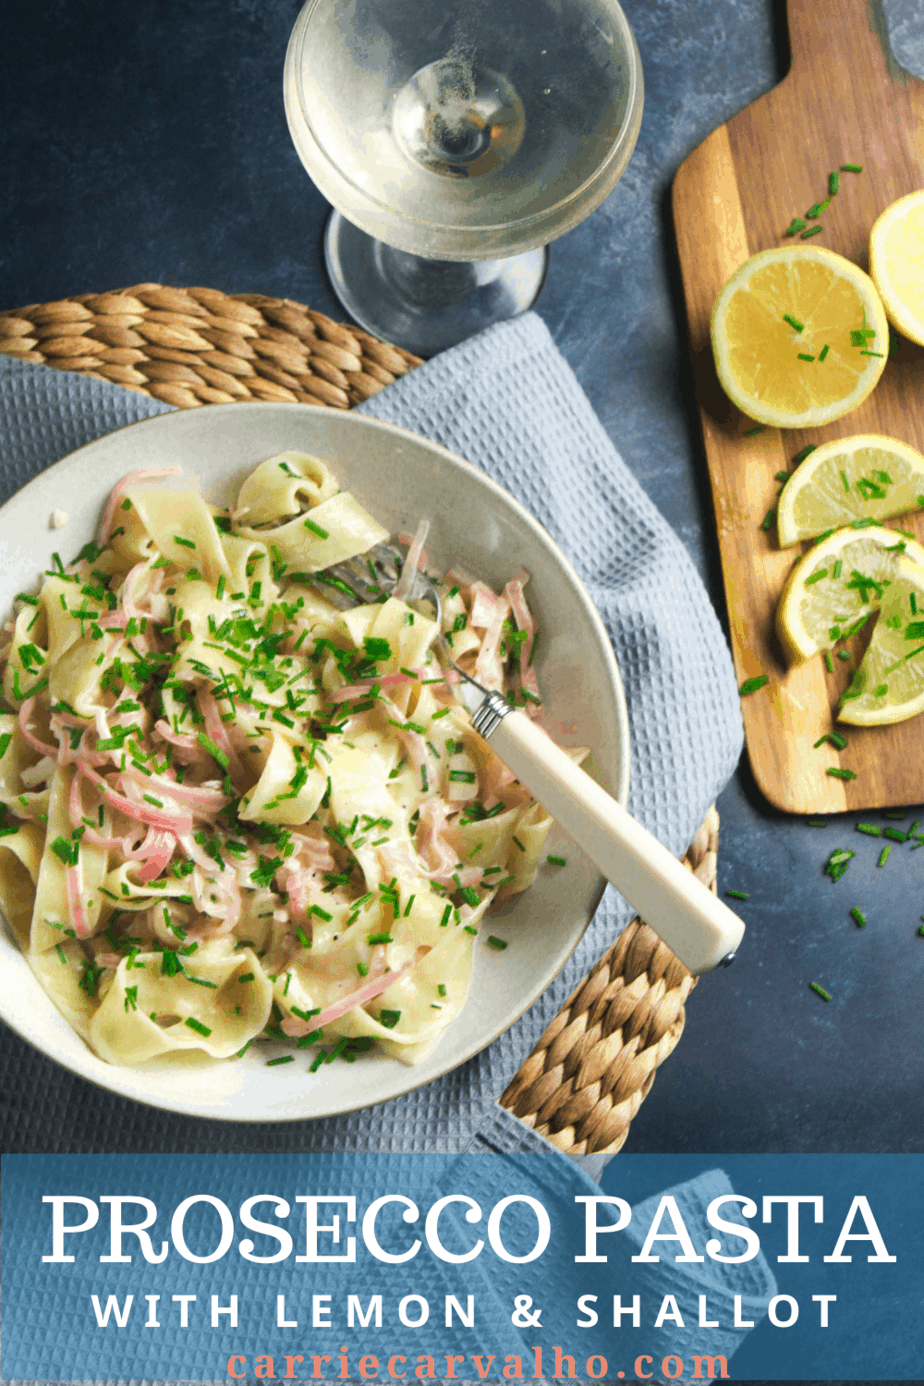 Prosecco Pasta with Lemon and Shallot